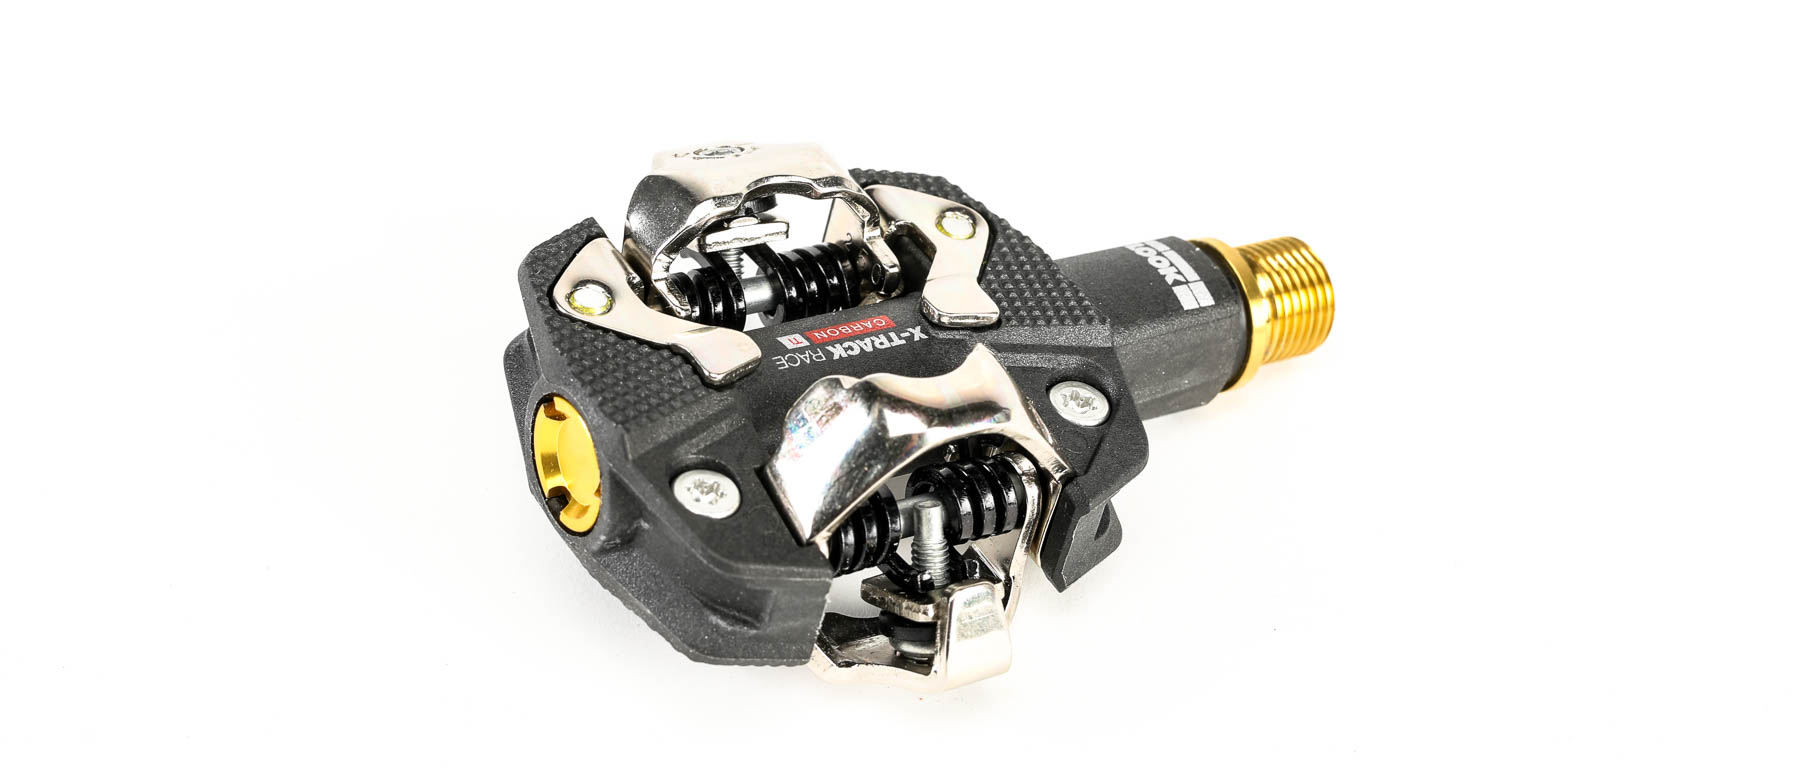 LOOK X-Track Race Carbon Ti MTB Pedals